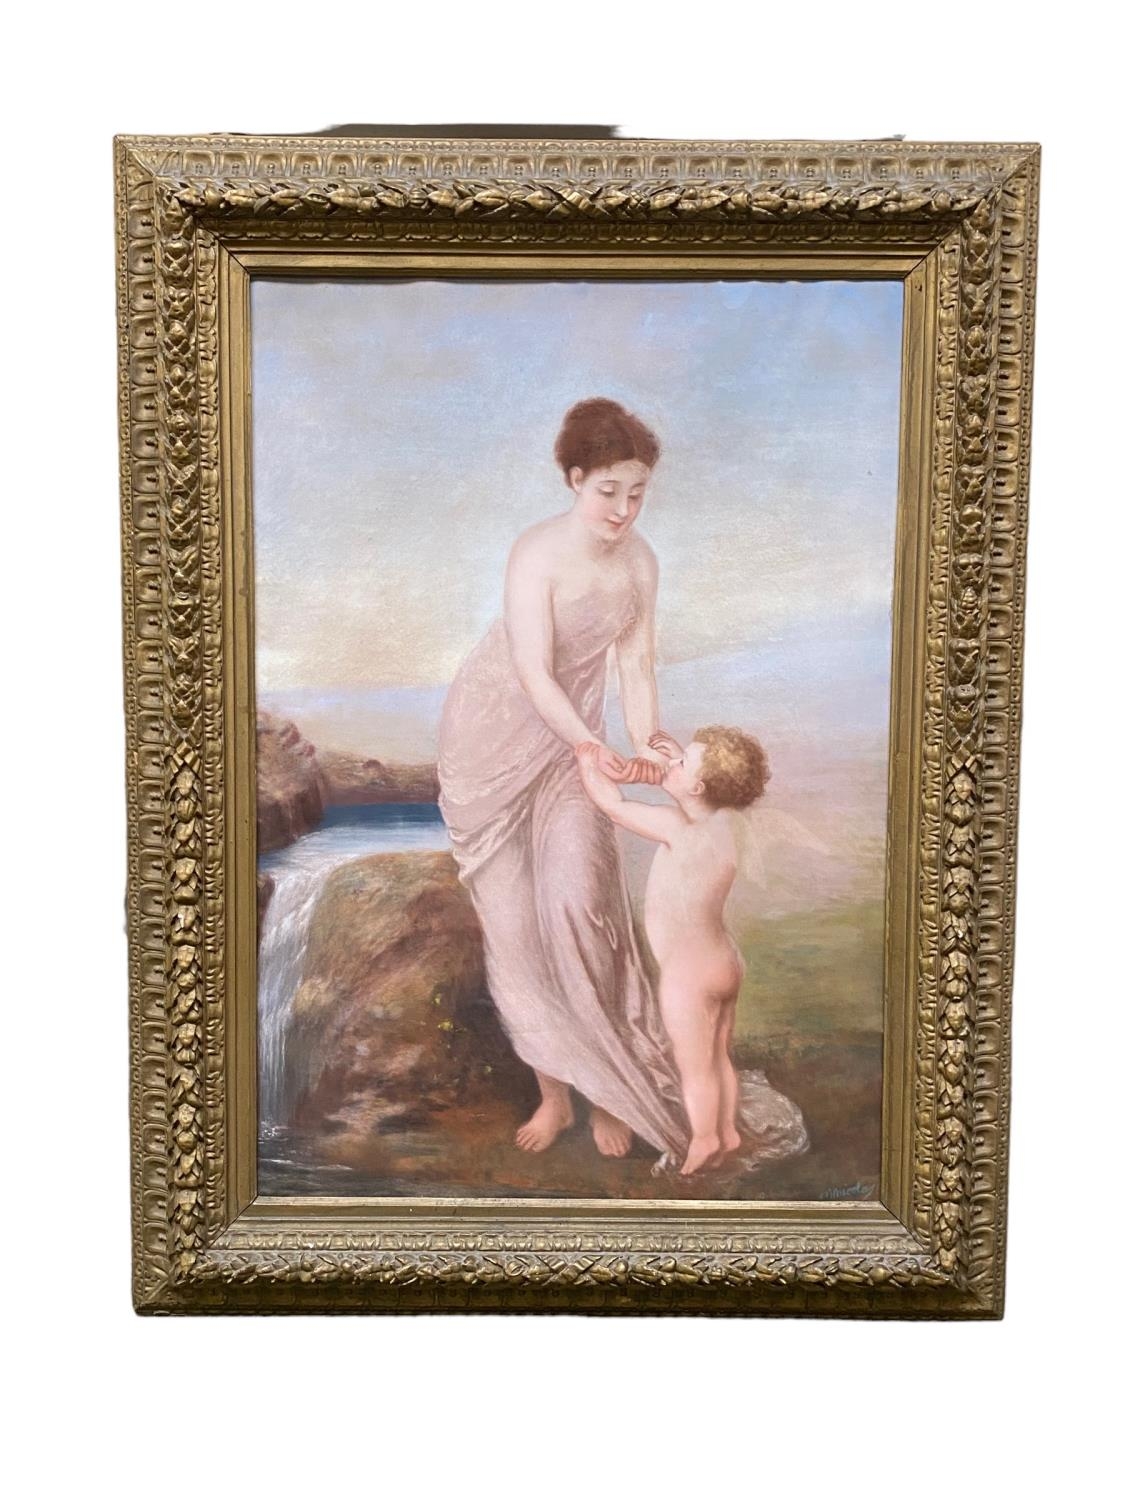 Late C19th/early C20th, oil on canvas, of mother and child at bath, Indistinctly signed ?Micelay, - Image 3 of 4